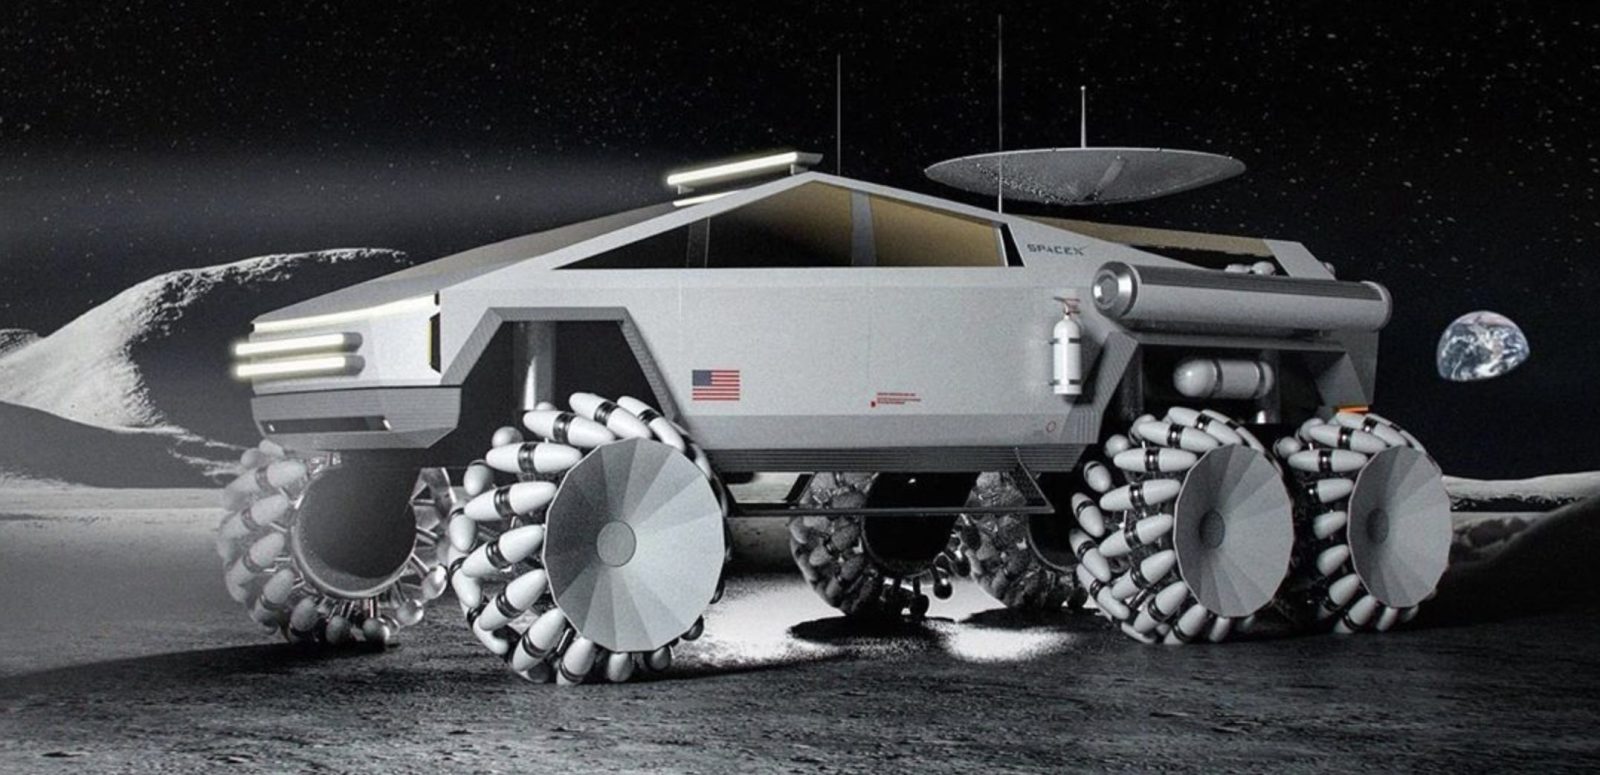 tesla cybertruck modified as awesome lunar vehicle could it be e reality